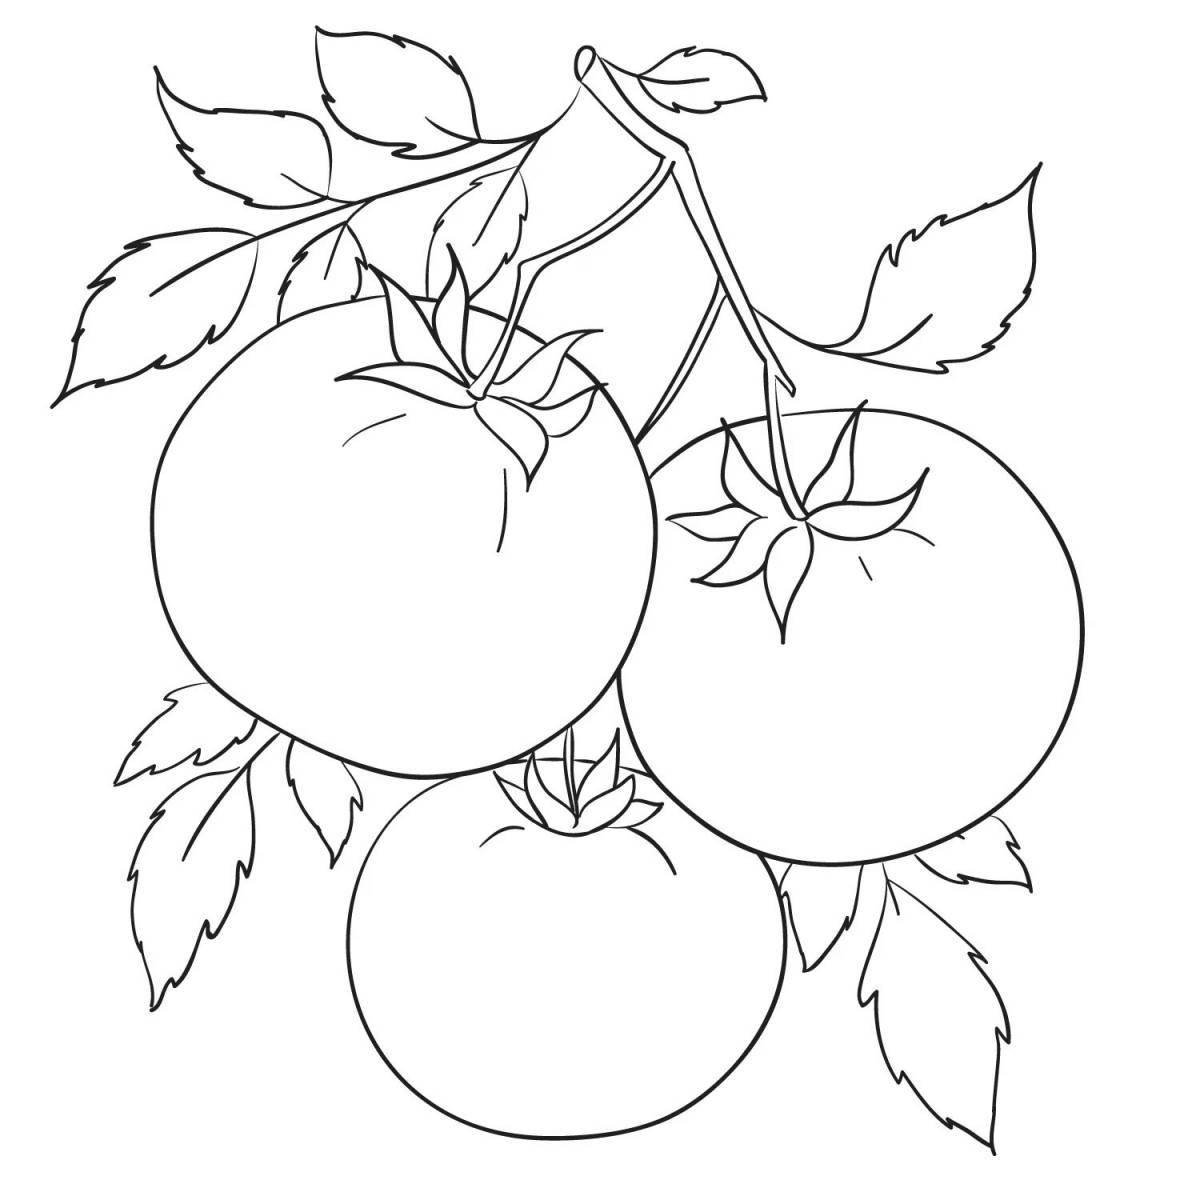 Creative tomato coloring book for 3-4 year olds